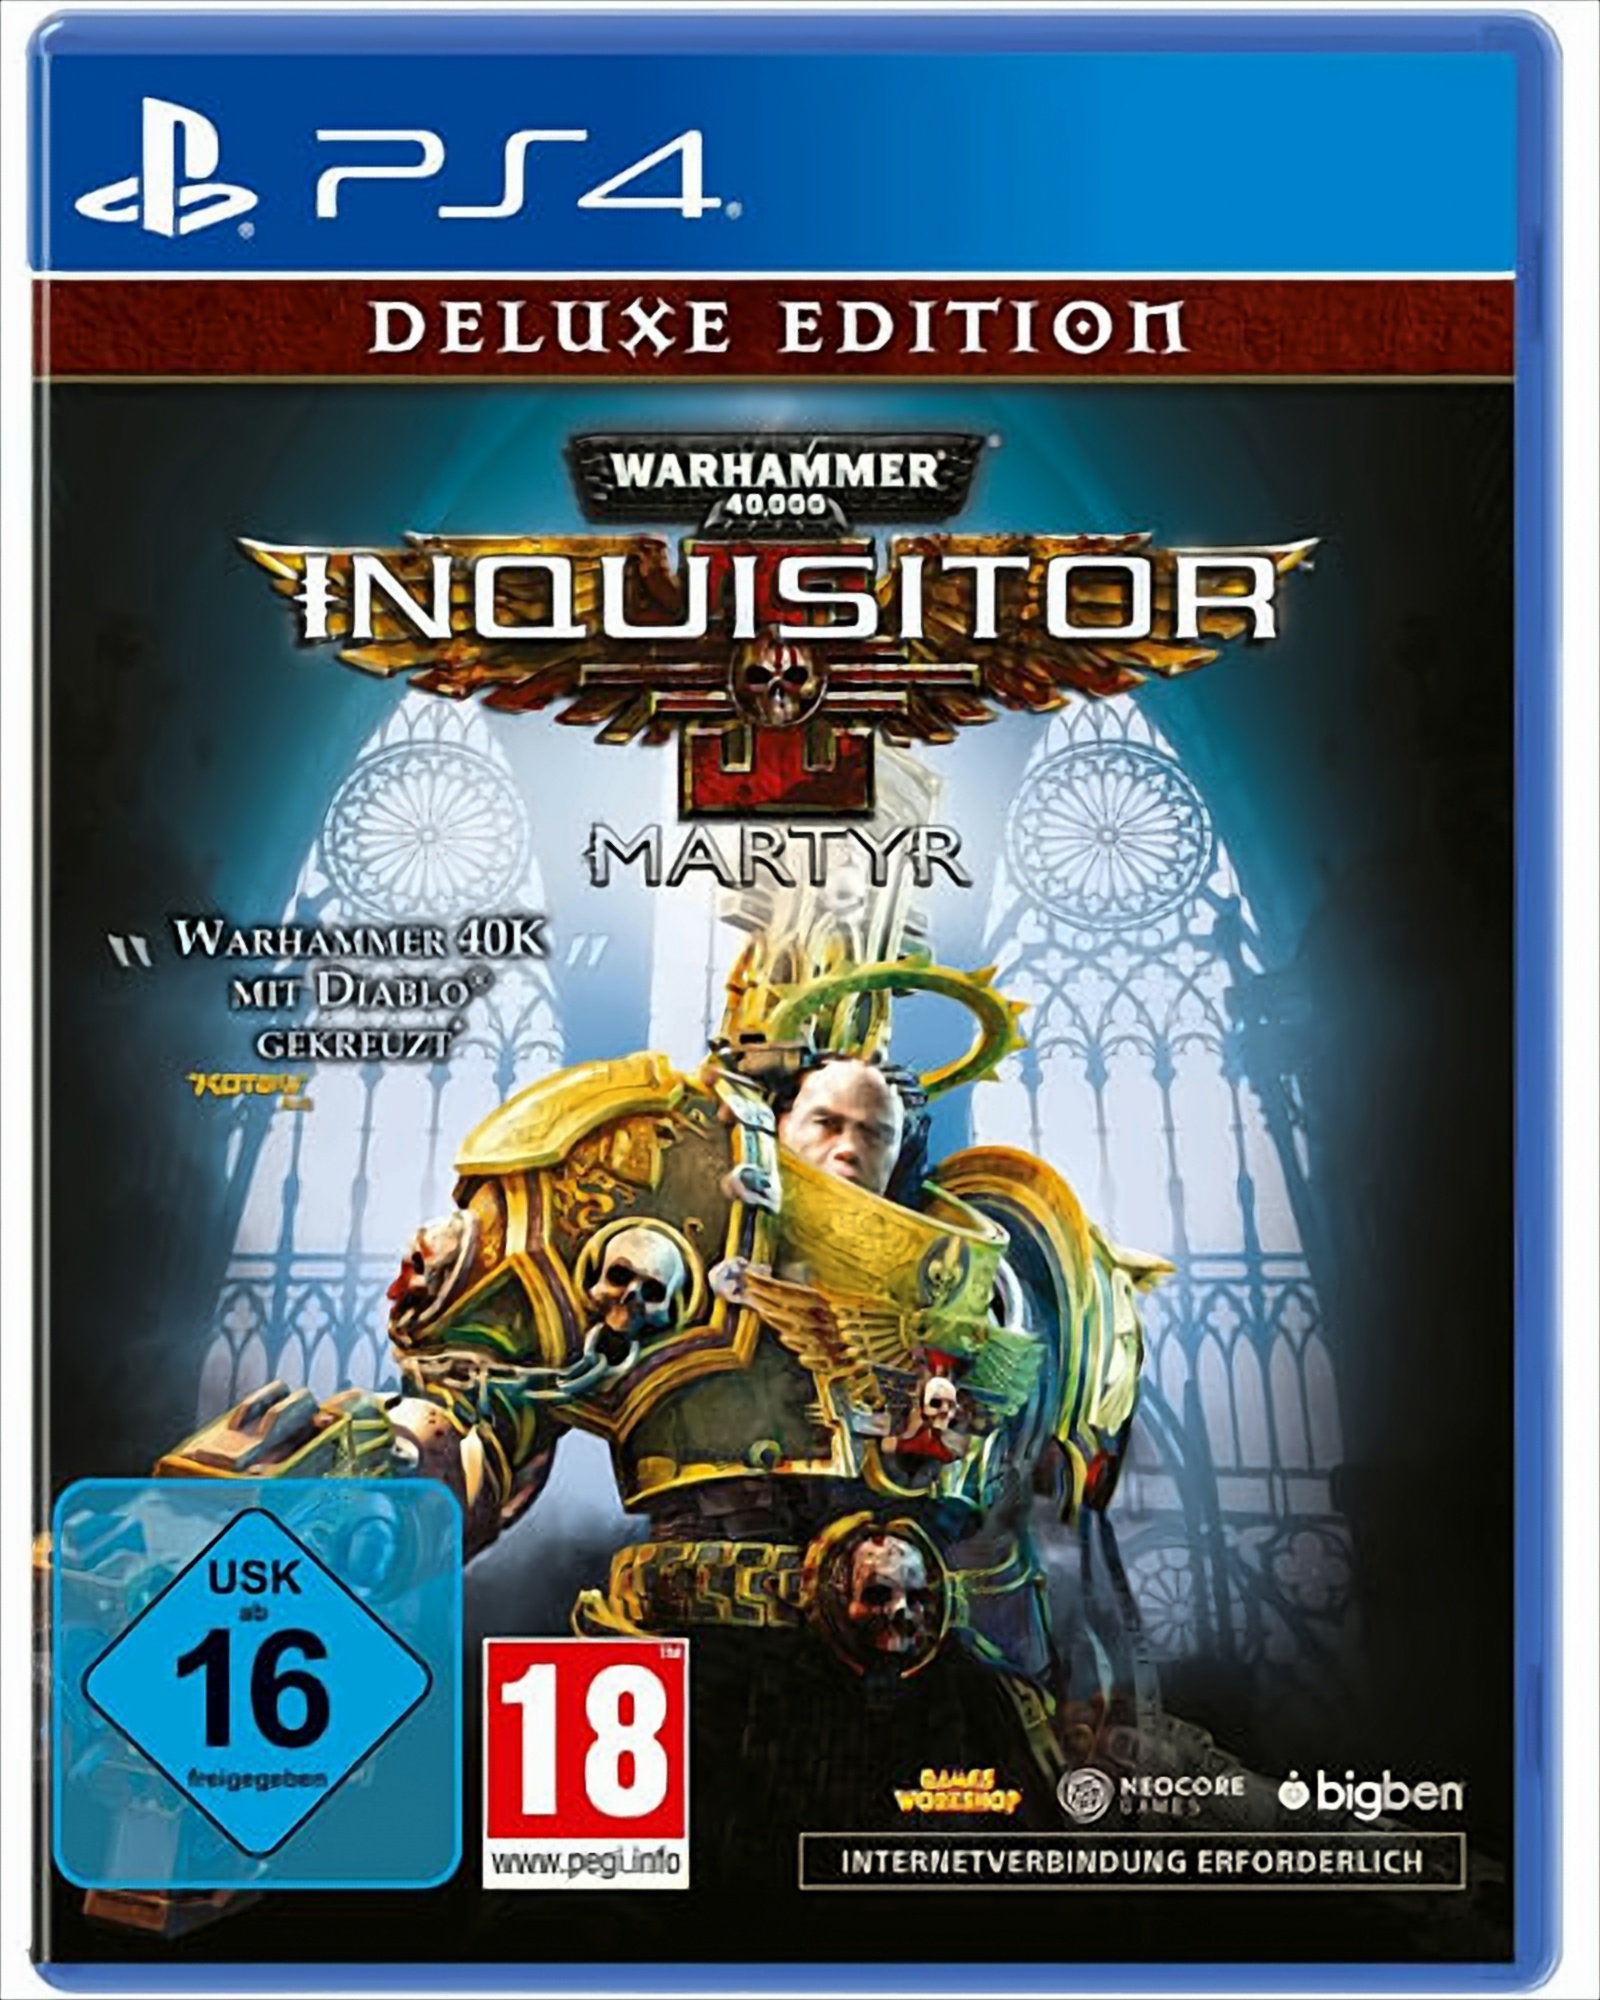 Warhammer PS4 DeLuxe 4] - 40.000 Inquisitor Edition Martyr [PlayStation -